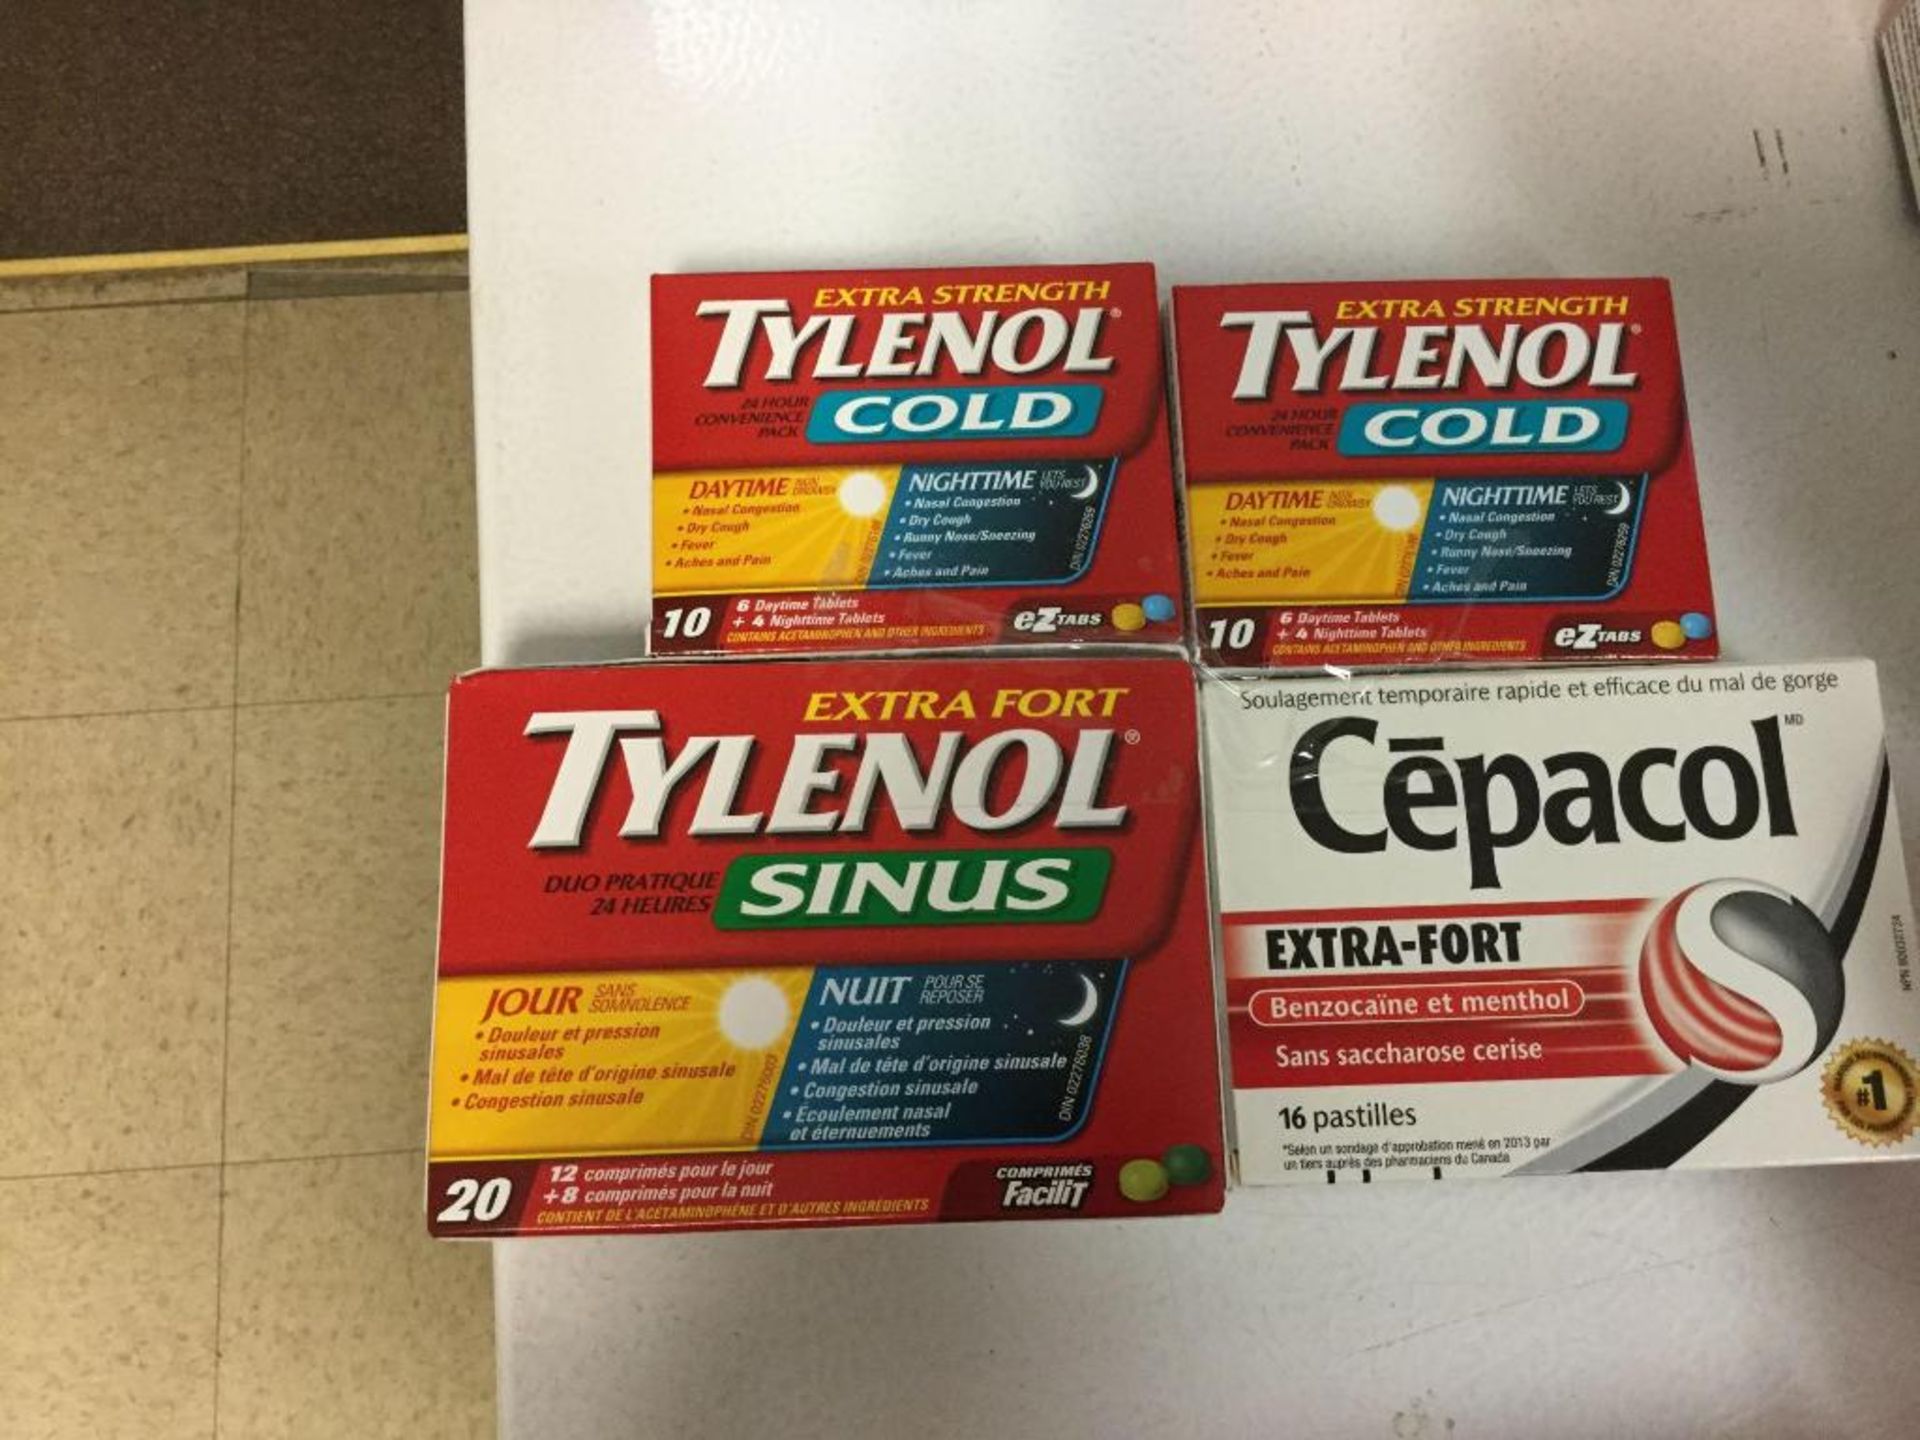 Lot of 4 - Tylenol Cold, Tylenol Sinus, and Cepacol - Image 2 of 2